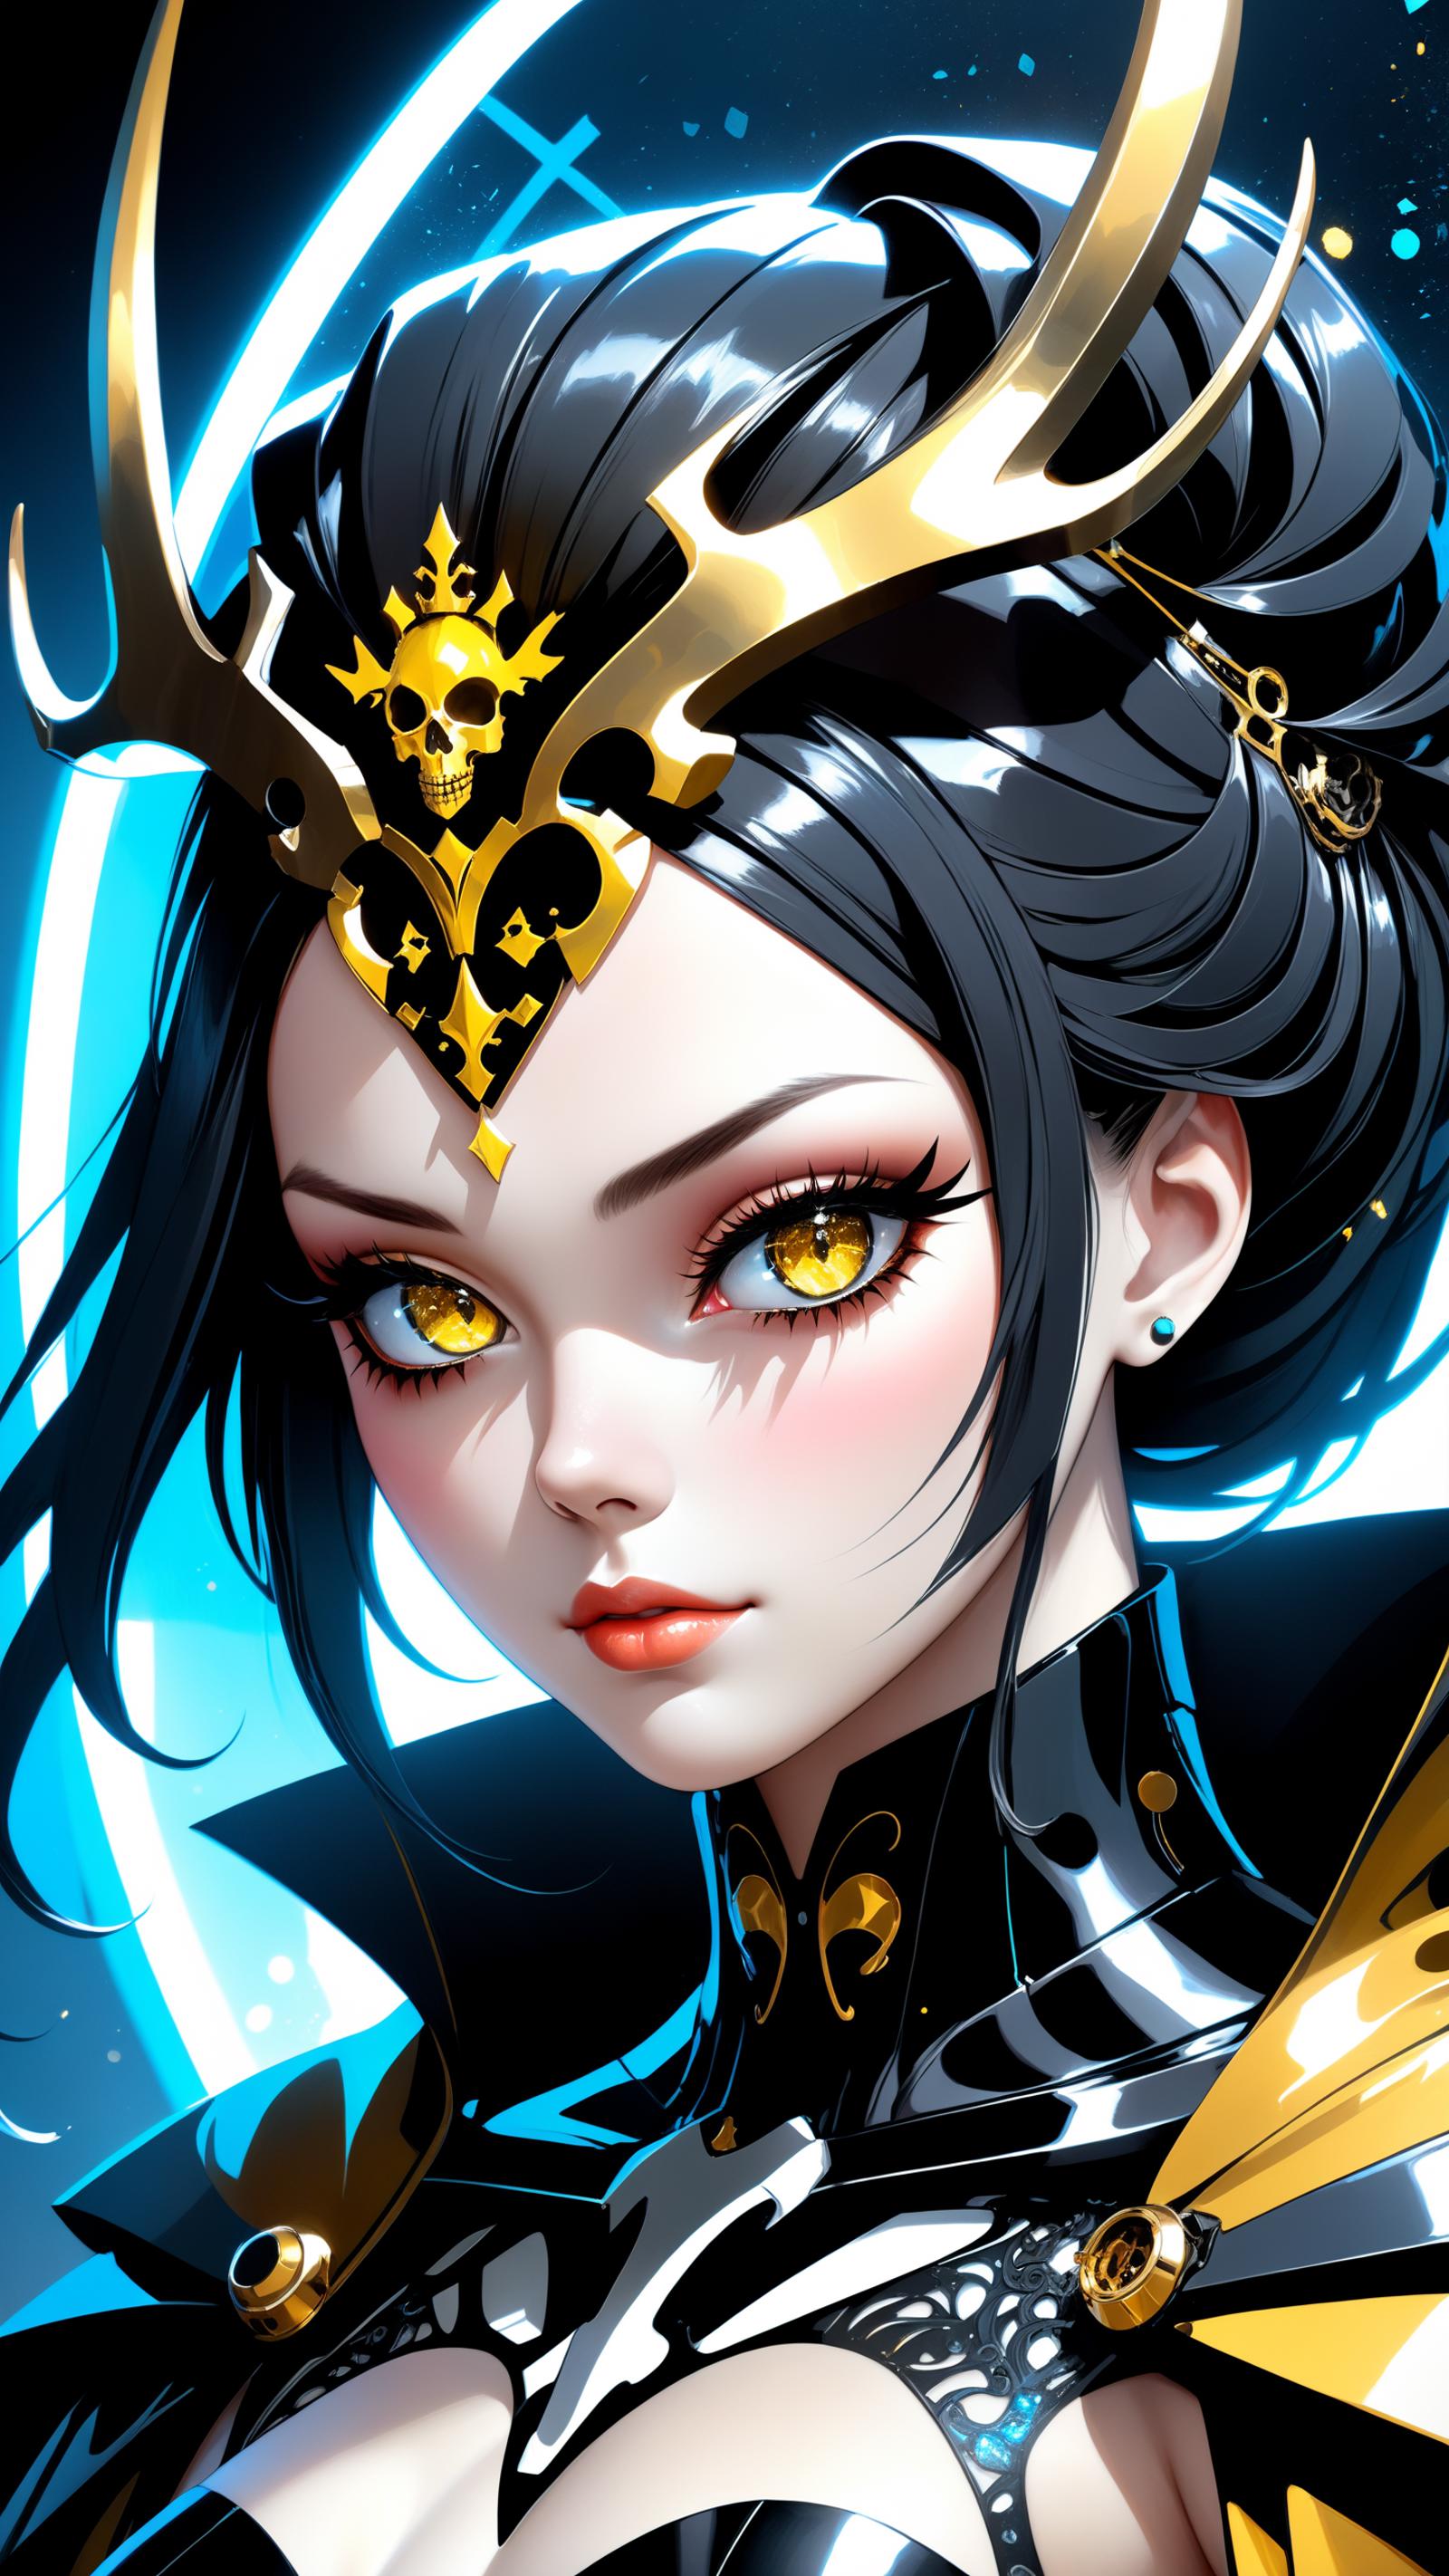 Blue-eyed Anime Girl with Black Hair and Gold Accents.